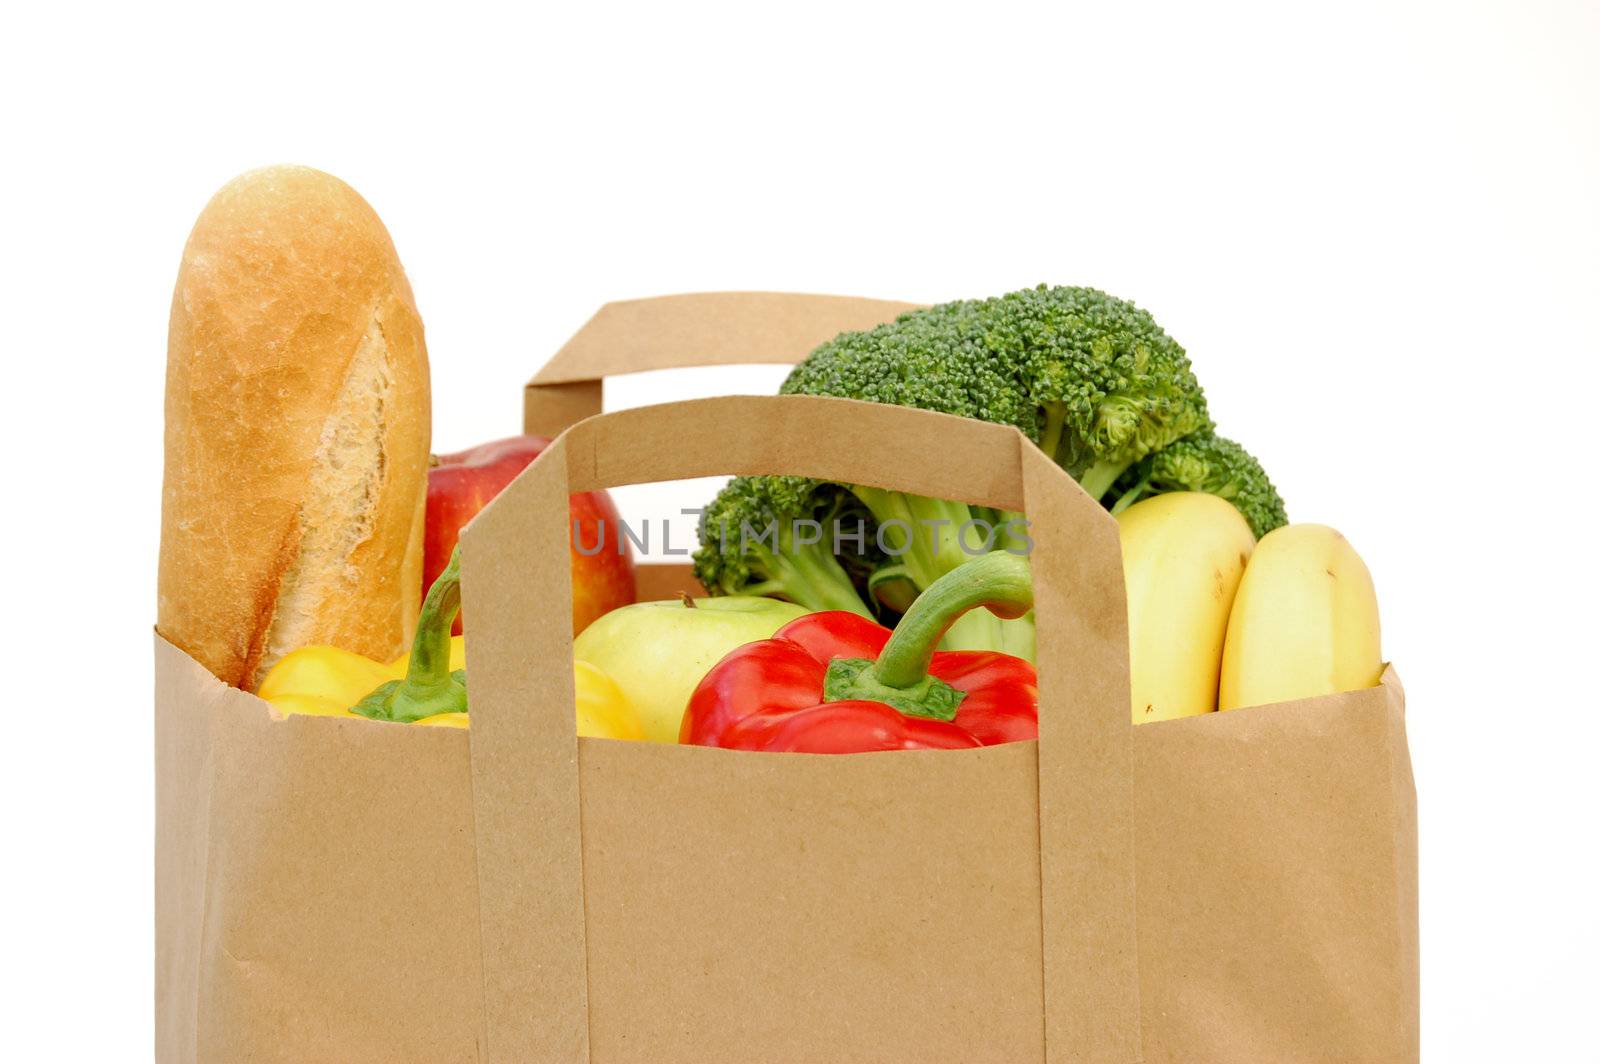 Close up of a bag of groceries